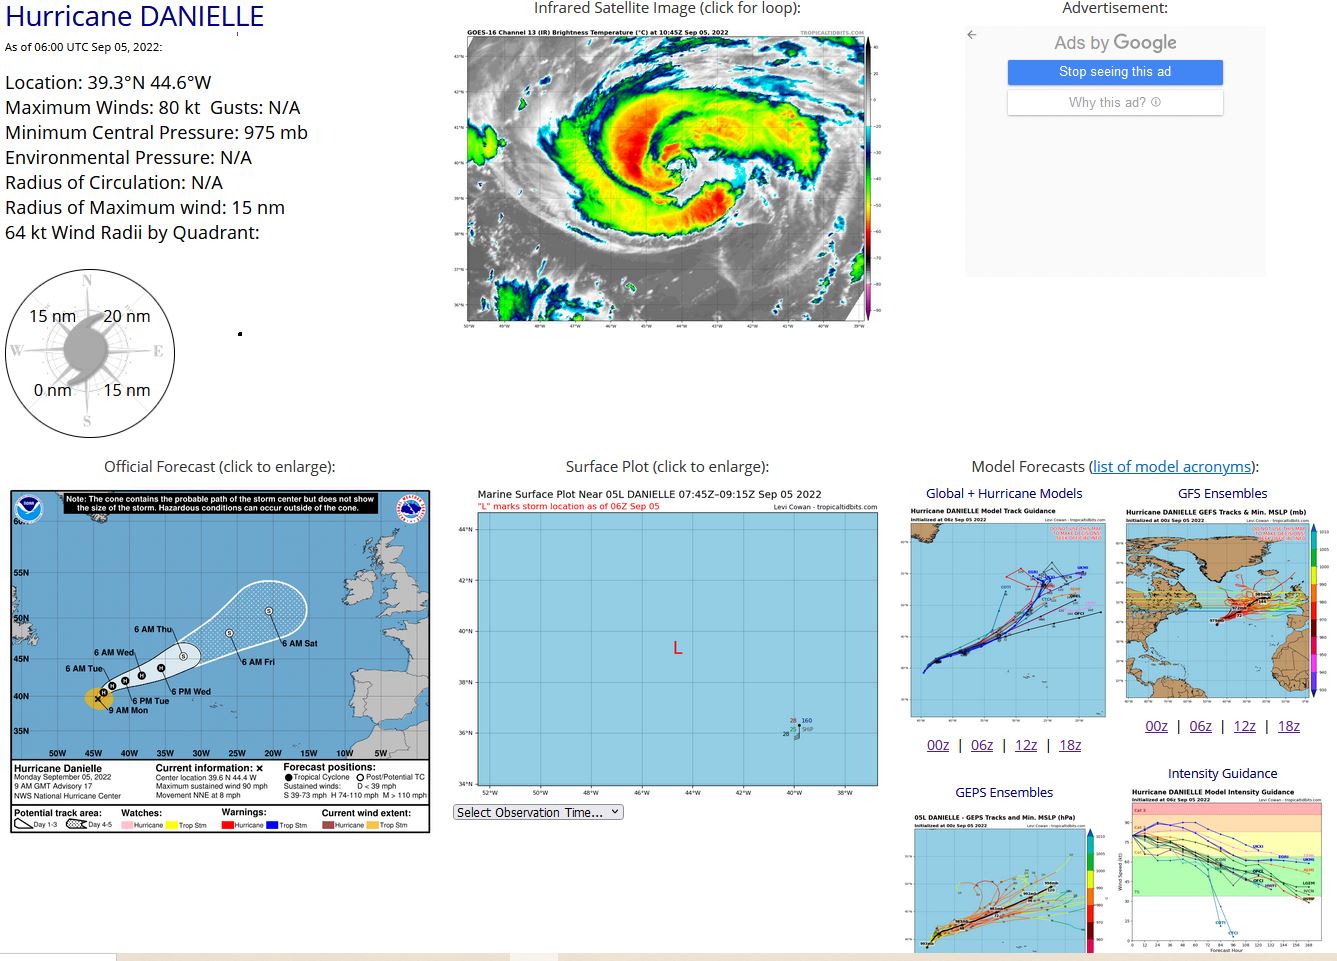 404  WTNT45 KNHC 050841 TCDAT5  Hurricane Danielle Discussion Number  17 NWS National Hurricane Center Miami FL       AL052022 900 AM GMT Mon Sep 05 2022  There's been little change in Danielle's cloud pattern during the past 6 hours, and a clear symmetric warm 13C banding eye feature has persisted and has intermittently been closing off.  The  satellite intensity estimates haven't changed, and the initial intensity is held at 80 kt for this advisory.  Little change in strength is forecast through today.  Afterward, the cyclone should slowly weaken through the entire period as it moves over cooler water while increasing southwesterly shear disrupts the upper outflow pattern.  The CMC, UKMET, and the GFS agree with Danielle to begin an extratropical transition around 36  hours and complete its change by 72 hours (Thursday).  This cyclone  transformation timeline is reflected in the NHC forecast, and the  predicted 5-day intensity closely follows the IVCN and HCCA aids.  The hurricane's initial motion is estimated to be 030 at 7 kt, a  little faster than previously noted.  Danielle should continue to  accelerate and move north-northeastward to northeastward through  early Tuesday in response to a mid-latitude baroclinic system  approaching from the northwest, out of the Canadian Maritimes.  By  Tuesday night, the cyclone should turn toward the east-northeast  within the mid-latitude westerly steering flow and continue in  this general motion for 60 hours.  A turn back toward the northeast  is forecast as an extratropical cyclone on Thursday.  It's  worth mentioning that earlier today, there was quite a bit of  uncertainty (global model cross-track spread) about Danielle's  trajectory beyond the mid-period.  The GFS and the UKMET predict  Danielle will turn back toward the northeast Wednesday in the  southwesterly peripheral flow of a larger baroclinic low  approaching the cyclone from the northwest Atlantic.  However, the  ECMWF 12 and 18z runs showed considerably less baroclinic low  influence while continuing toward the east-northeast, southwest of  the British Isles.  The latest 00z run, subsequently, has trended  more toward the GFS/UKMET solution, which has resulted in some  increase in track forecast confidence.  Accordingly, the NHC  forecast is again adjusted slightly north of the previous one to  align more with a consensus (TVCA) of the models mentioned above.   FORECAST POSITIONS AND MAX WINDS  INIT  05/0900Z 39.6N  44.4W   80 KT  90 MPH  12H  05/1800Z 40.5N  43.6W   80 KT  90 MPH  24H  06/0600Z 41.4N  42.4W   75 KT  85 MPH  36H  06/1800Z 42.1N  40.6W   75 KT  85 MPH  48H  07/0600Z 42.8N  38.3W   70 KT  80 MPH  60H  07/1800Z 43.8N  35.6W   65 KT  75 MPH  72H  08/0600Z 45.3N  32.5W   60 KT  70 MPH...POST-TROP/EXTRATROP  96H  09/0600Z 48.2N  26.1W   55 KT  65 MPH...POST-TROP/EXTRATROP 120H  10/0600Z 50.8N  20.6W   50 KT  60 MPH...POST-TROP/EXTRATROP  $$ Forecaster Roberts